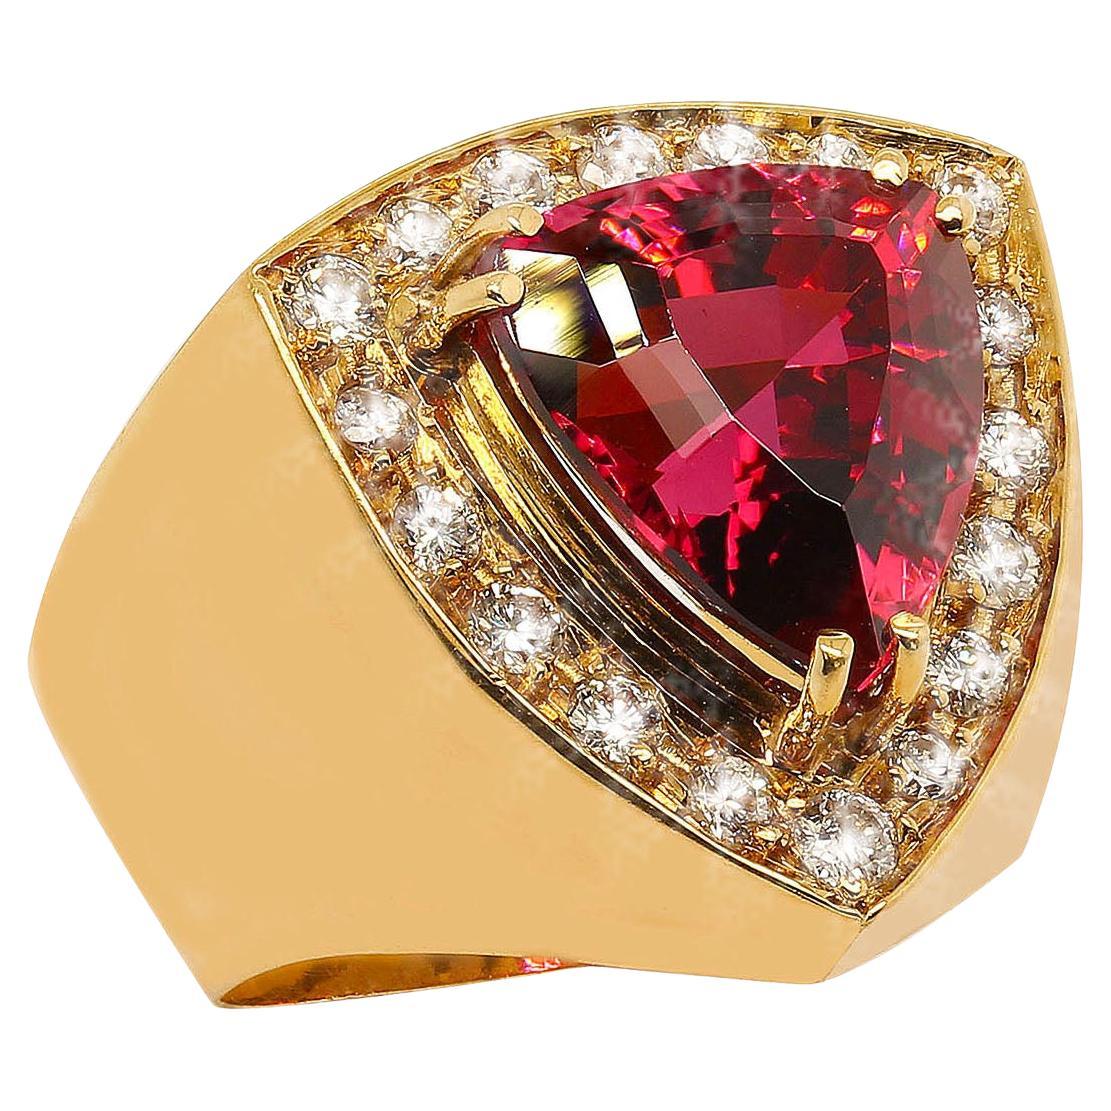 18K Yellow Gold Ring with Sparkling Trillion Rubelite (11x10mm) set above flat surface with 18 pave set diamonds. This surface itself is 18x17mm.   Heavy gold shank rises up from tapered back to create a stunning setting for the diamonds and